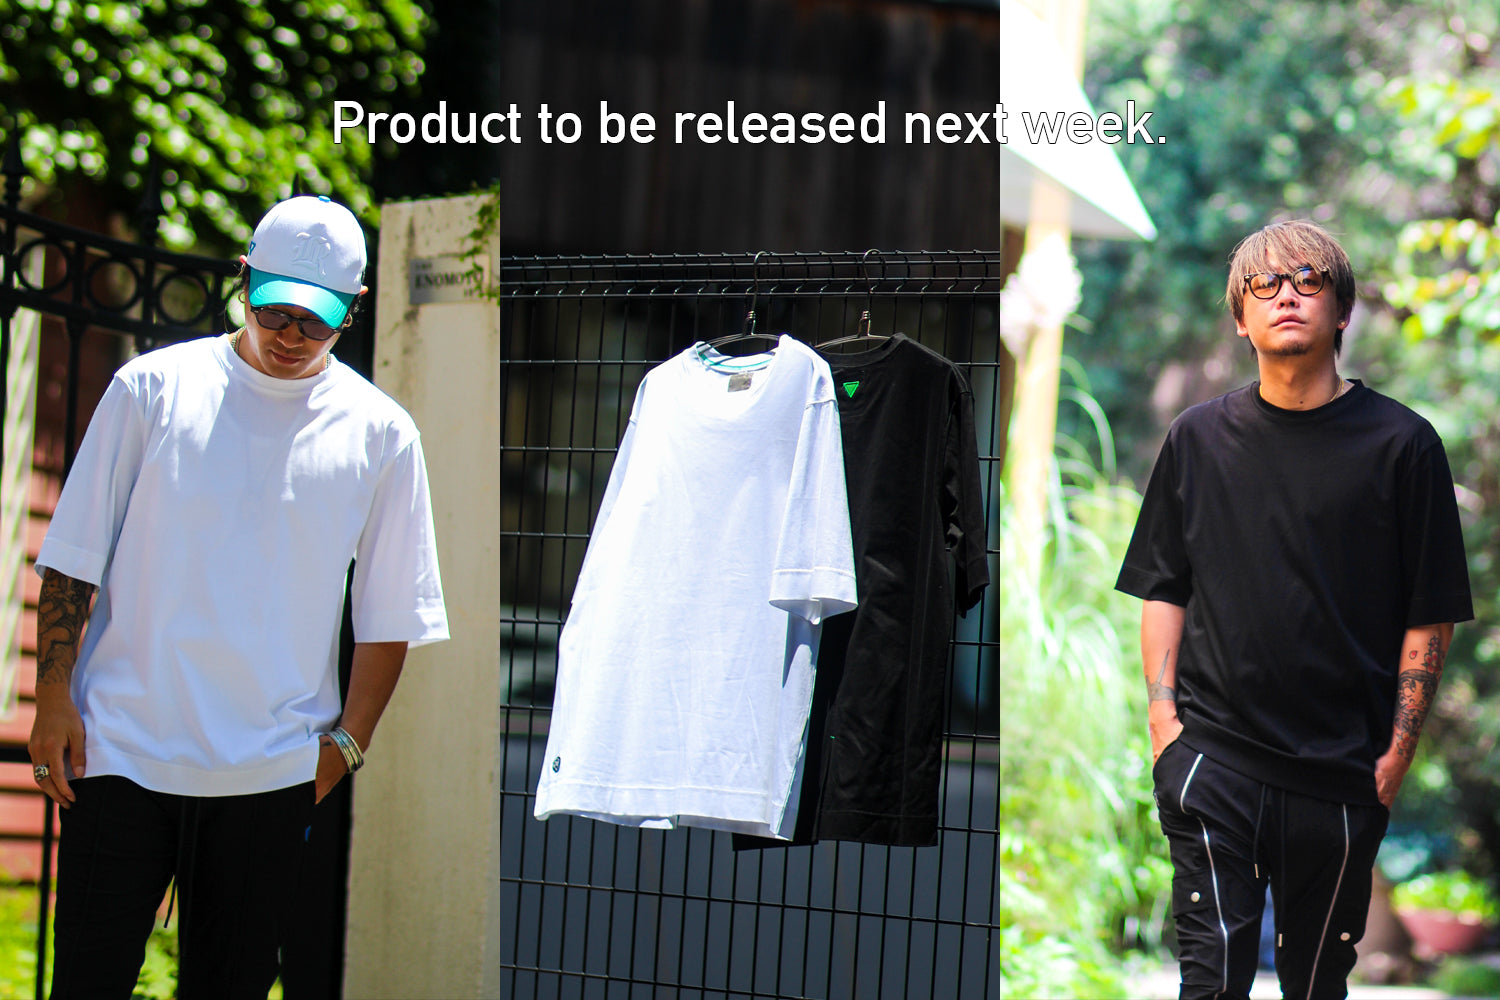 Product released in the 2nd week of August.